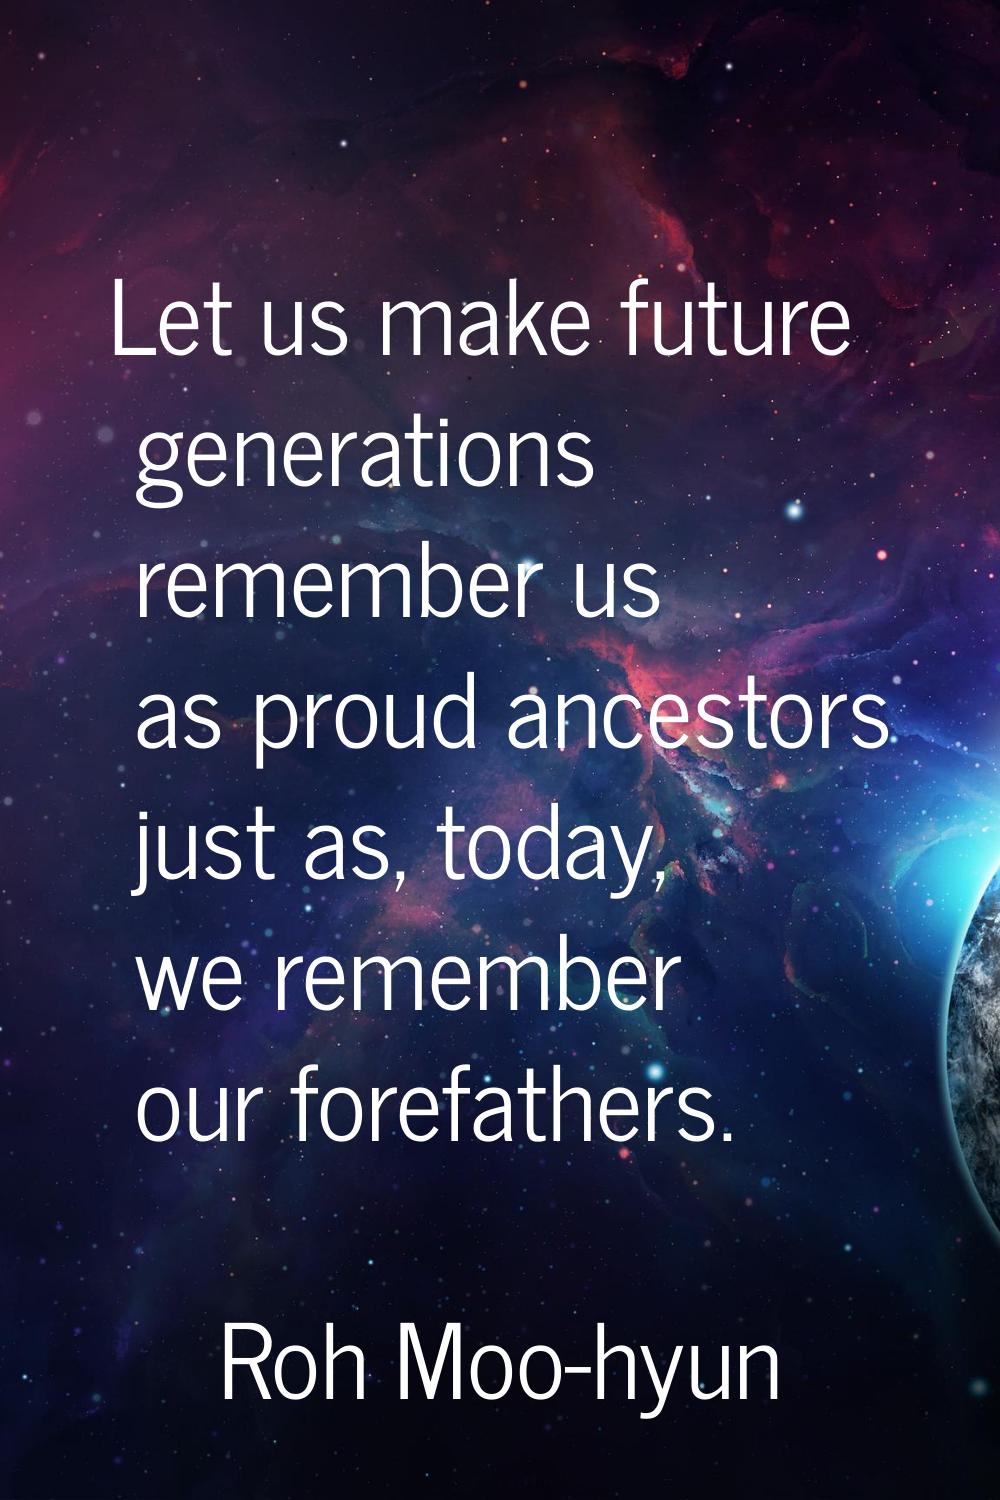 Let us make future generations remember us as proud ancestors just as, today, we remember our foref